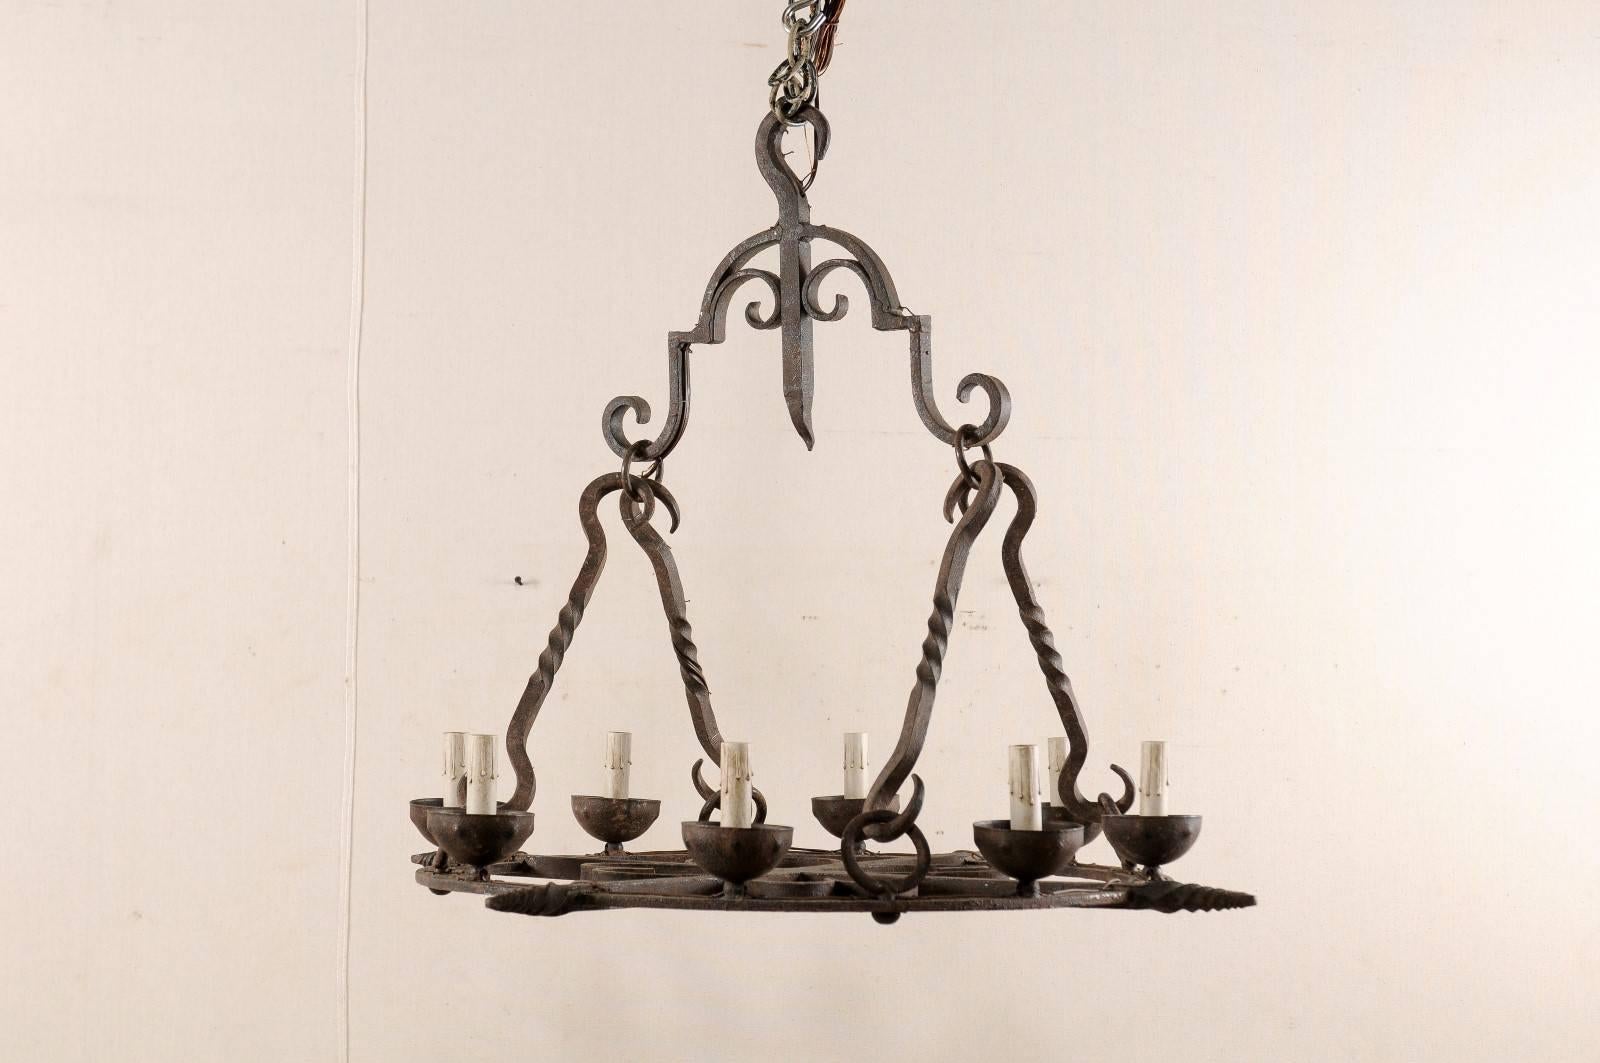 A French Mid-Century eight-light chandelier. This French chandelier from the mid-20th century of forged iron has a flattened, circular shaped body which supports the eight iron bobèches and candle covers around its perimeter. The lower section is